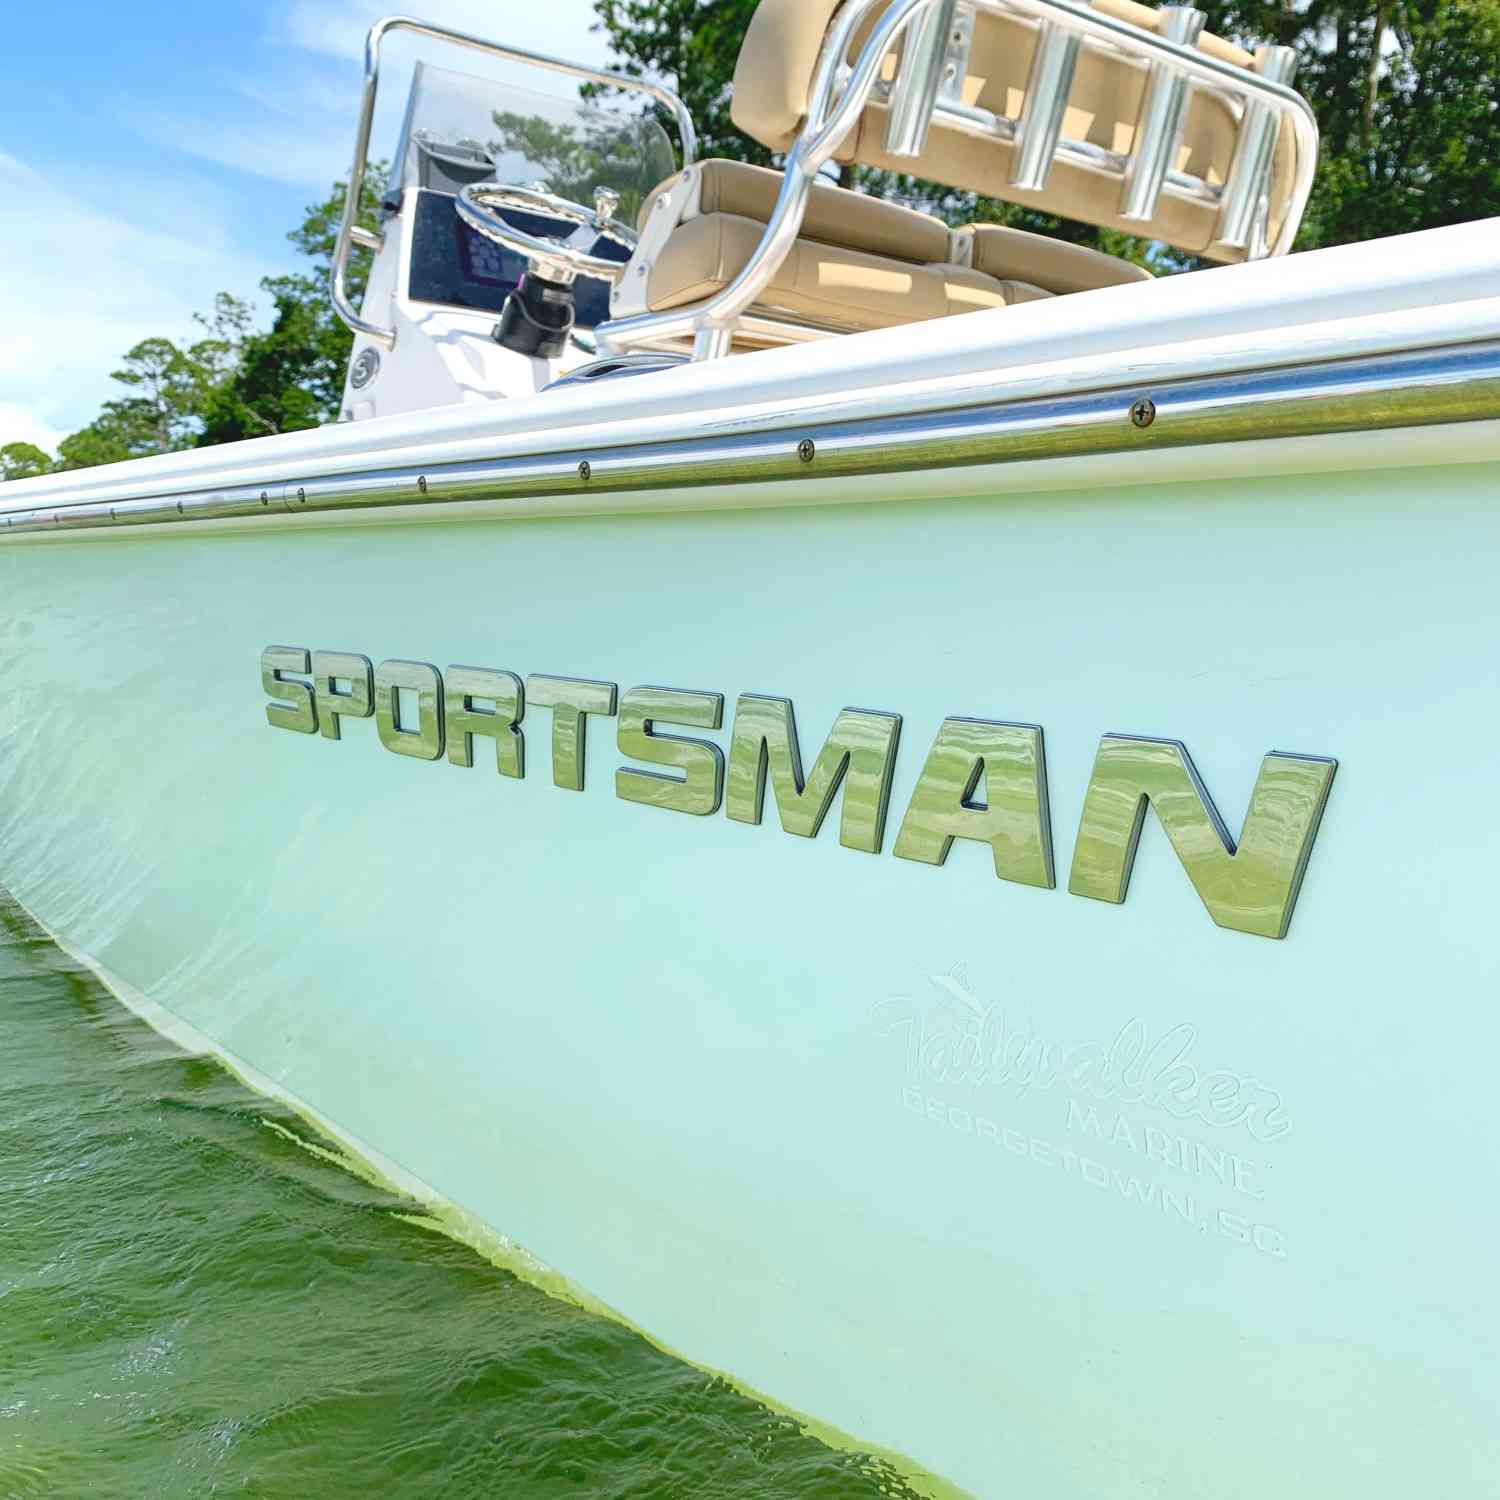 This photo of my Sportsman Masters 207 was taken on Kingsley Lake, FL just off the shore of Camp Blanding.